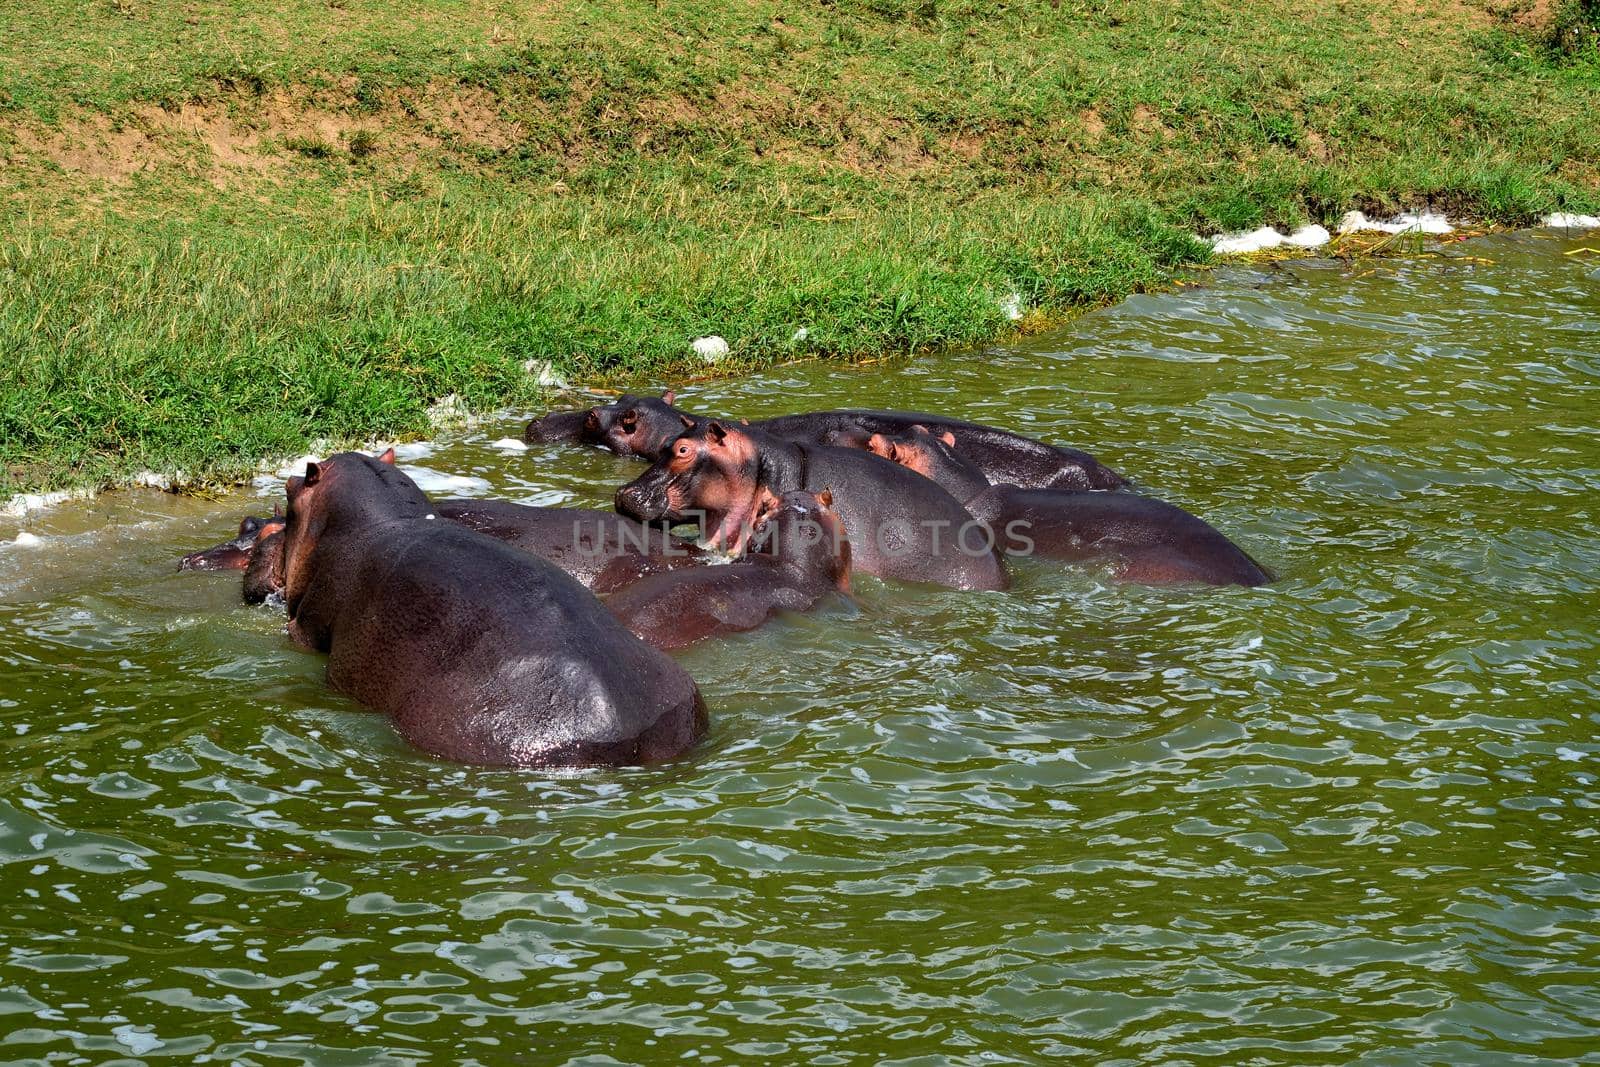 A huge hippopotamus and its cub in the Kazing chanel waters by silentstock639